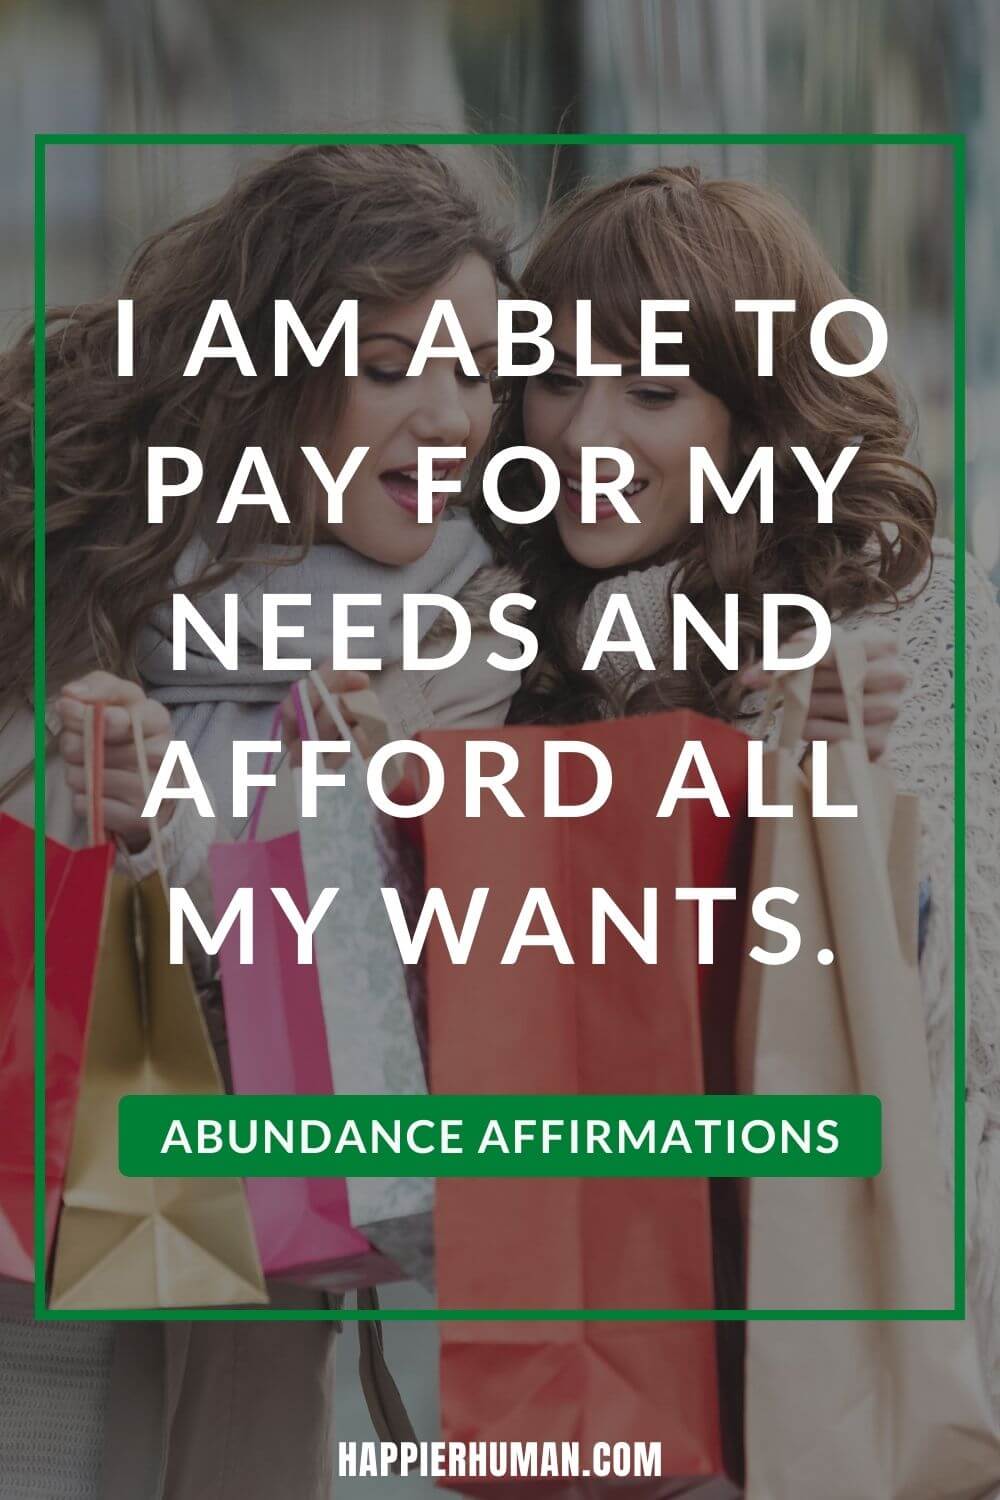 Abundance Affirmations - I am able to pay for my needs and afford all my wants. | law of attraction affirmations for money | money magnet affirmations | 111 money affirmations